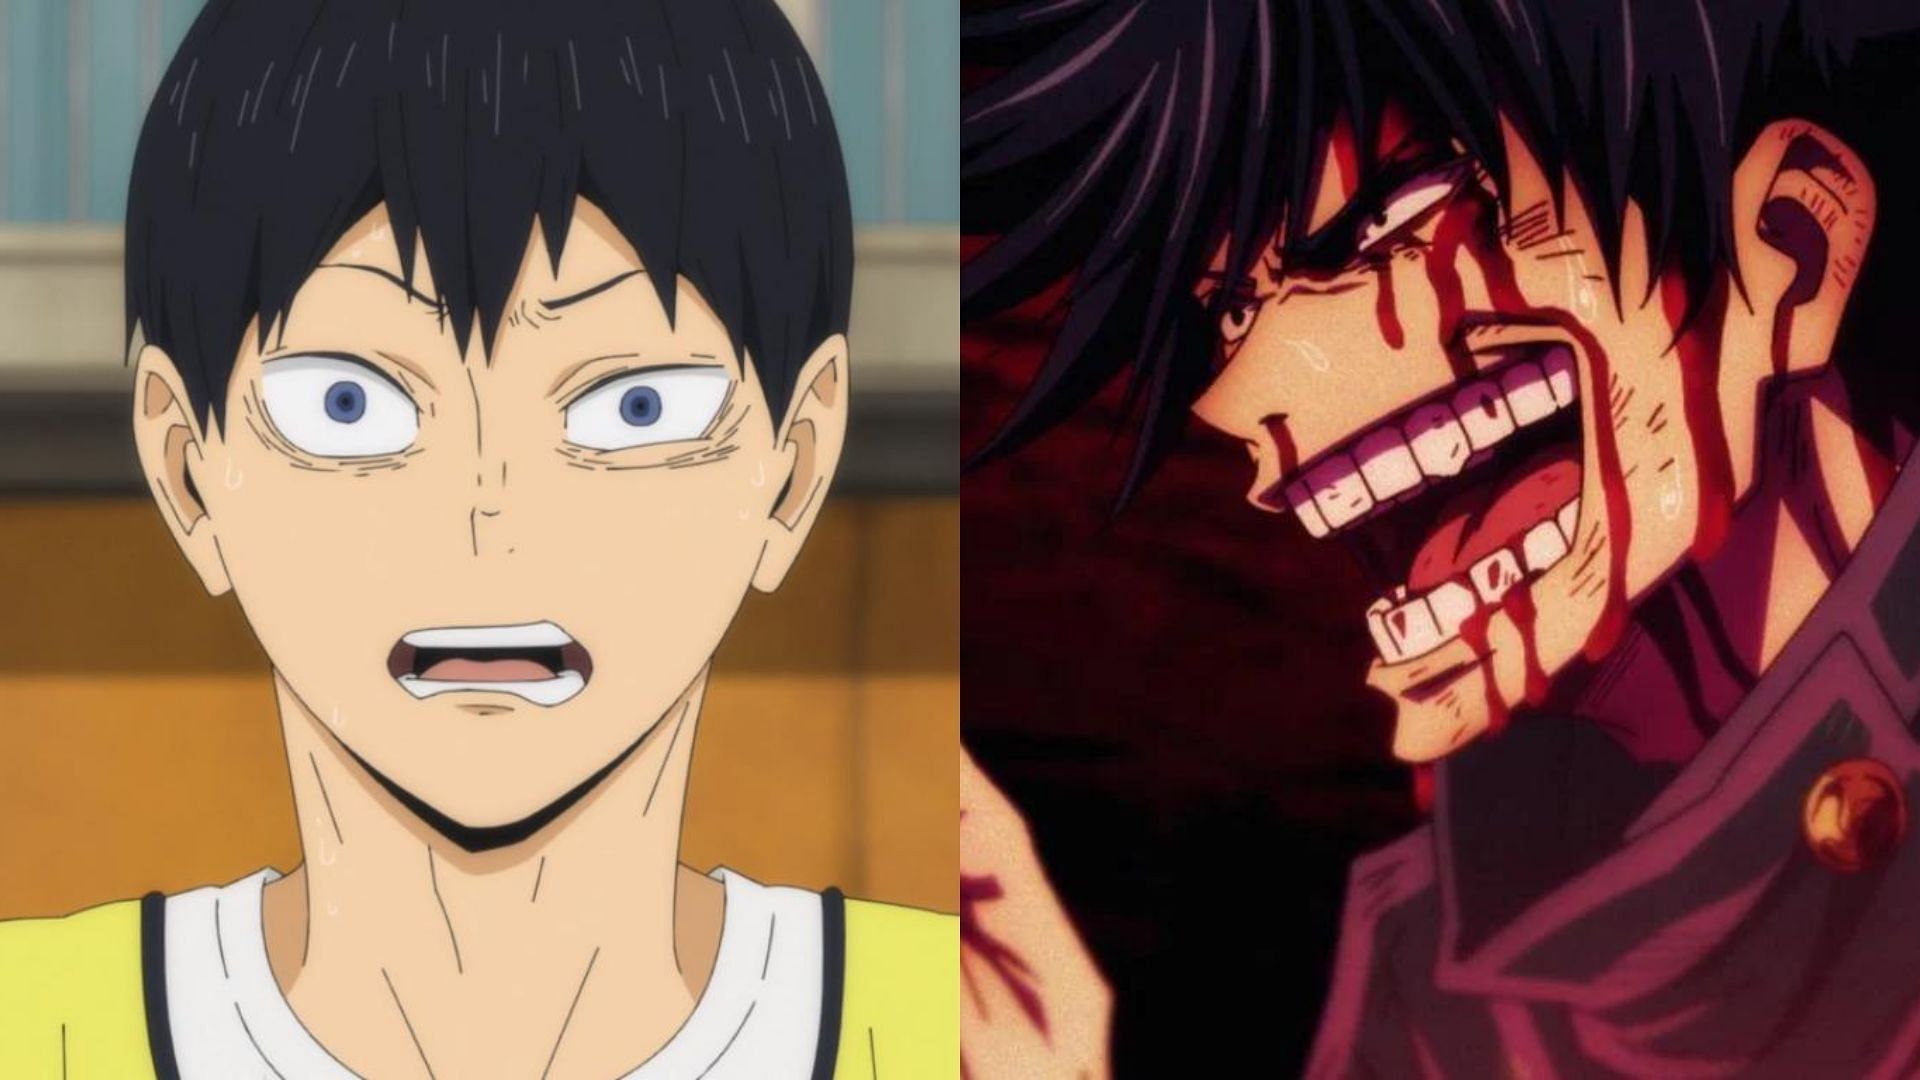 Tobio from Haikyuu!! and Megumi from Jujutsu Kaisen can be formidable opponents when the time calls for it (Image via Production I.G, MAPPA)